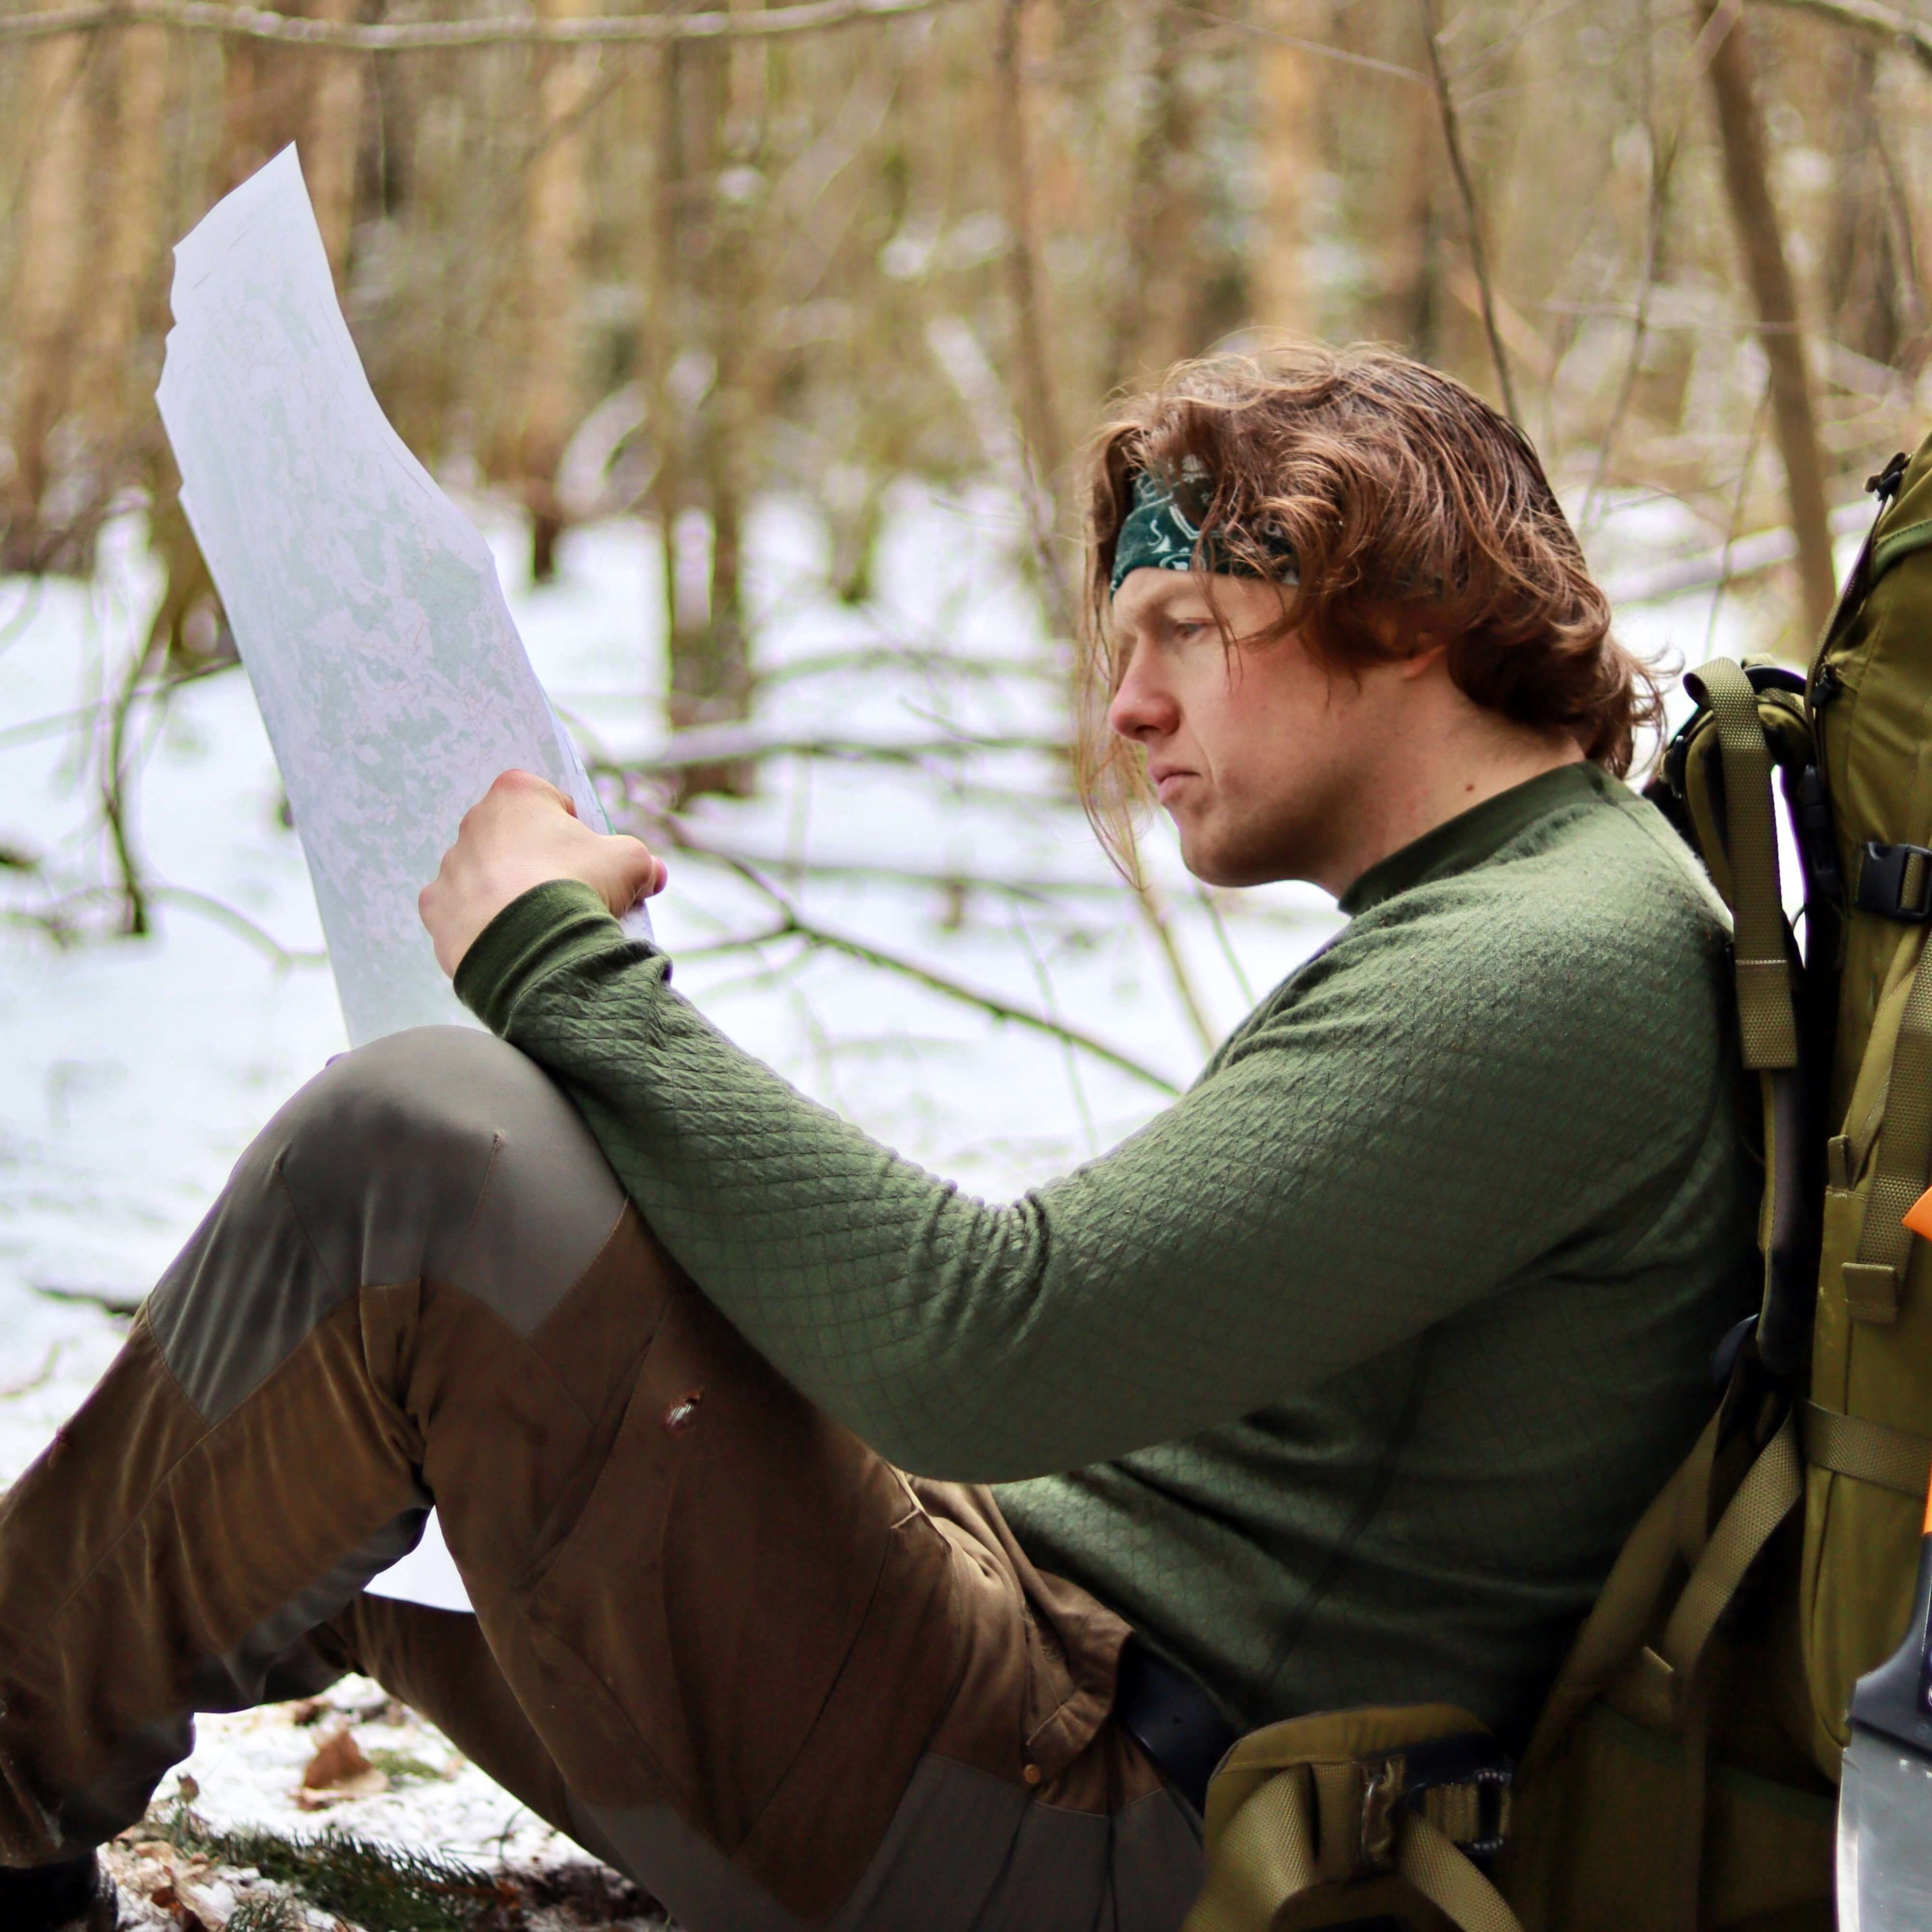 a-man-sitting-and-checking-map-in-the-forest-at-winter